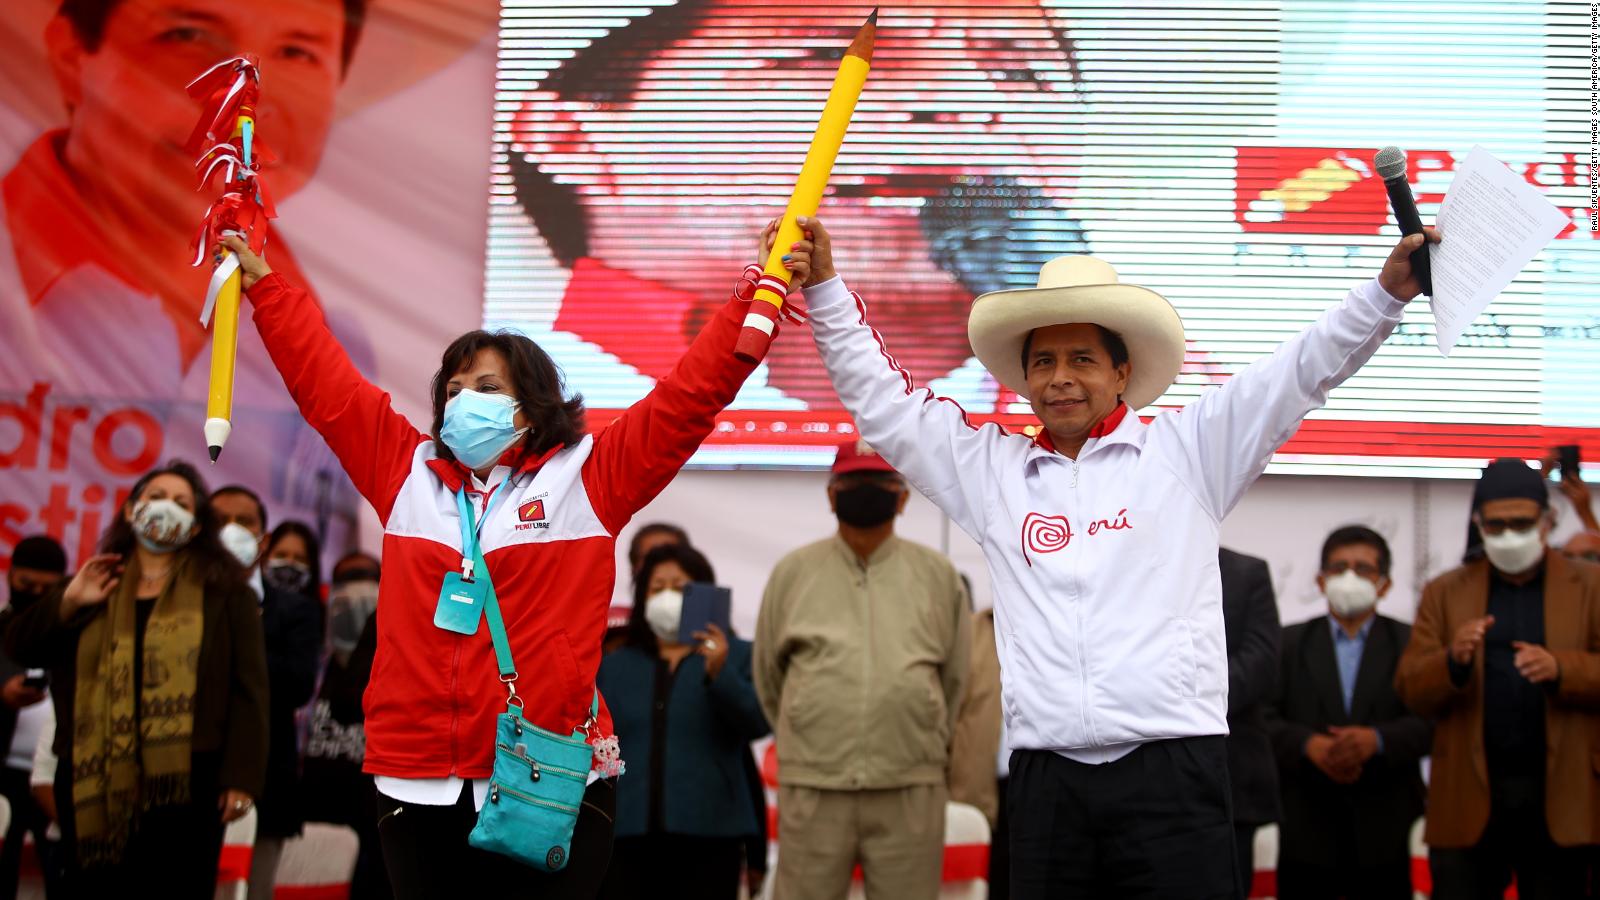 They will investigate the vice president of Peru who is alleged to have committed money laundering